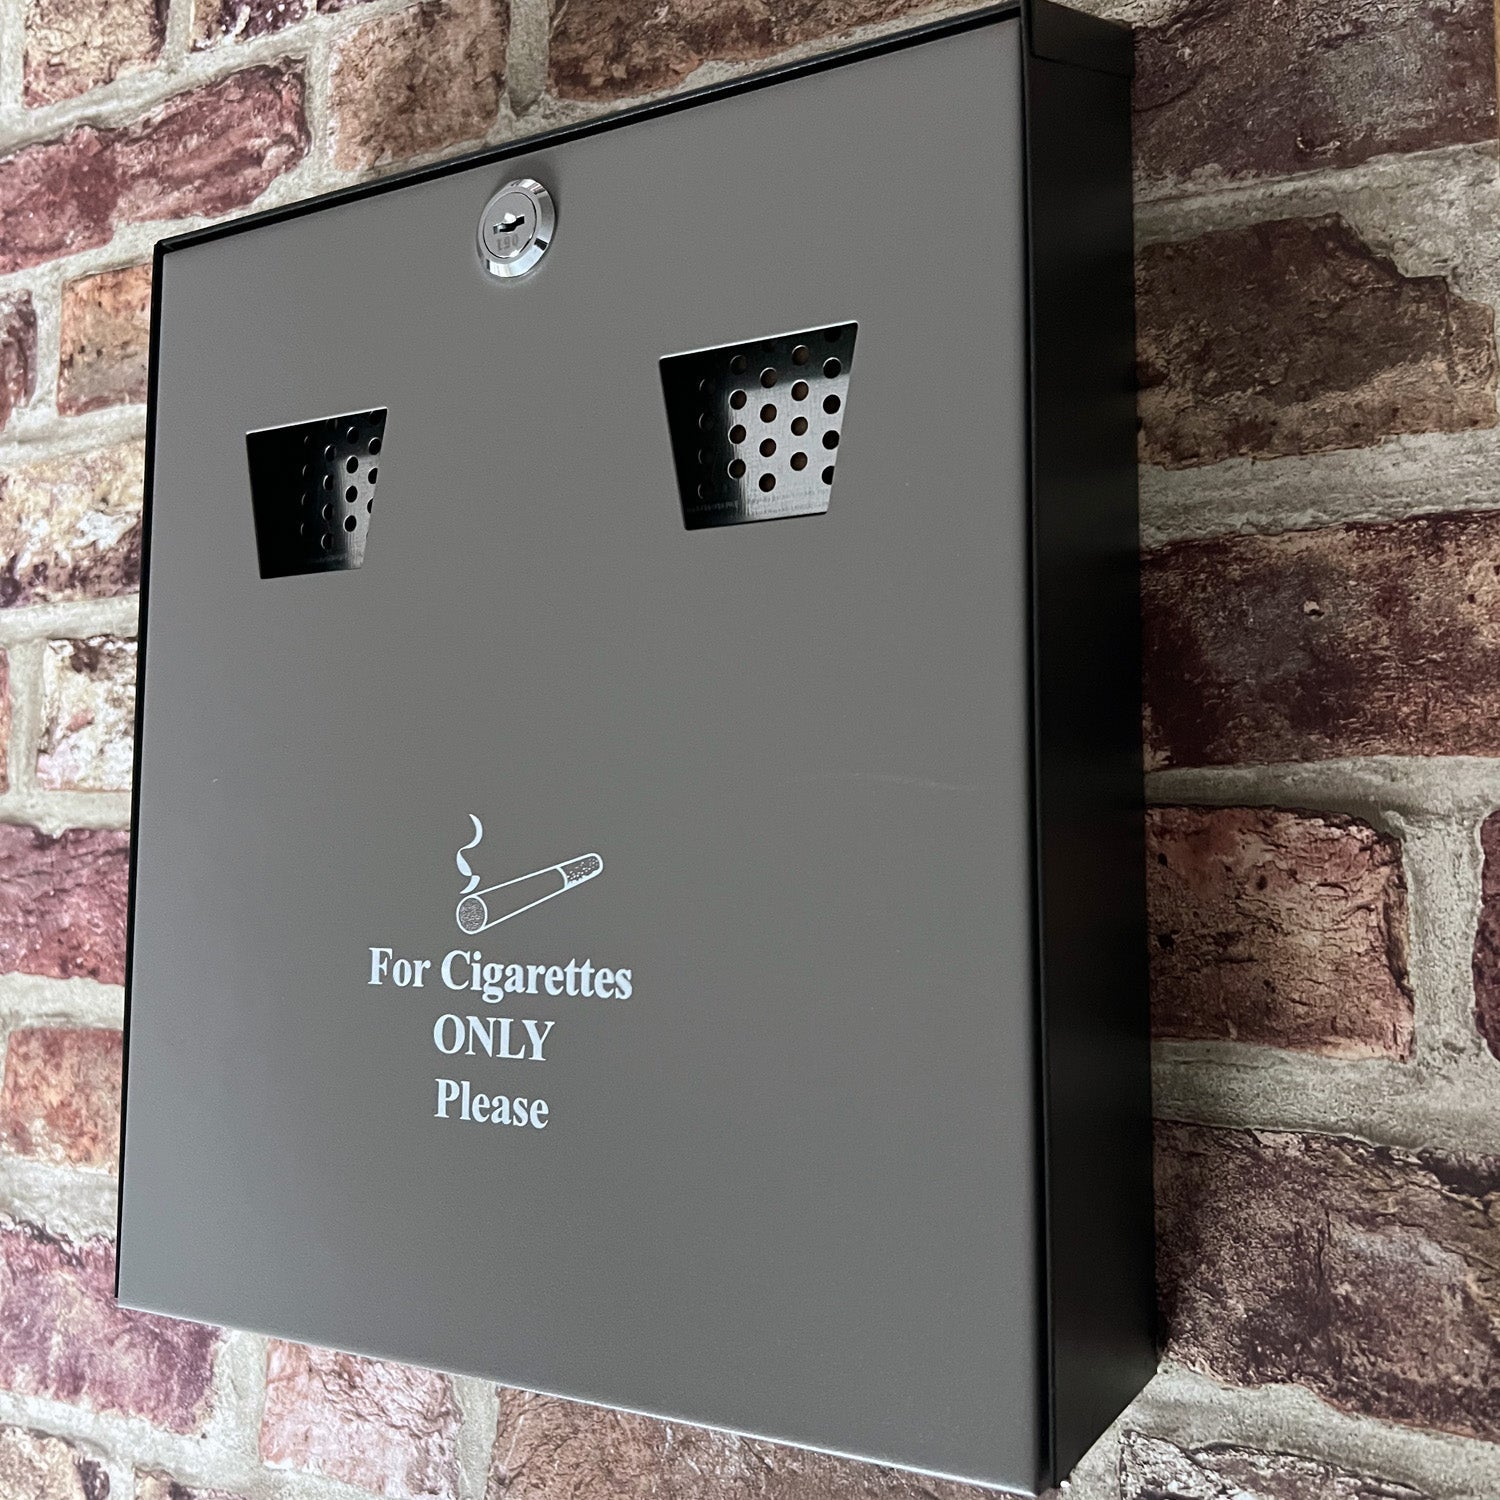 Wall-mounted ash bin with a 3.1L capacity, attached to a brick wall. The bin is dark grey with a lock at the top and features two stub plates. It is labeled 'For Cigarettes ONLY Please' to designate its purpose.